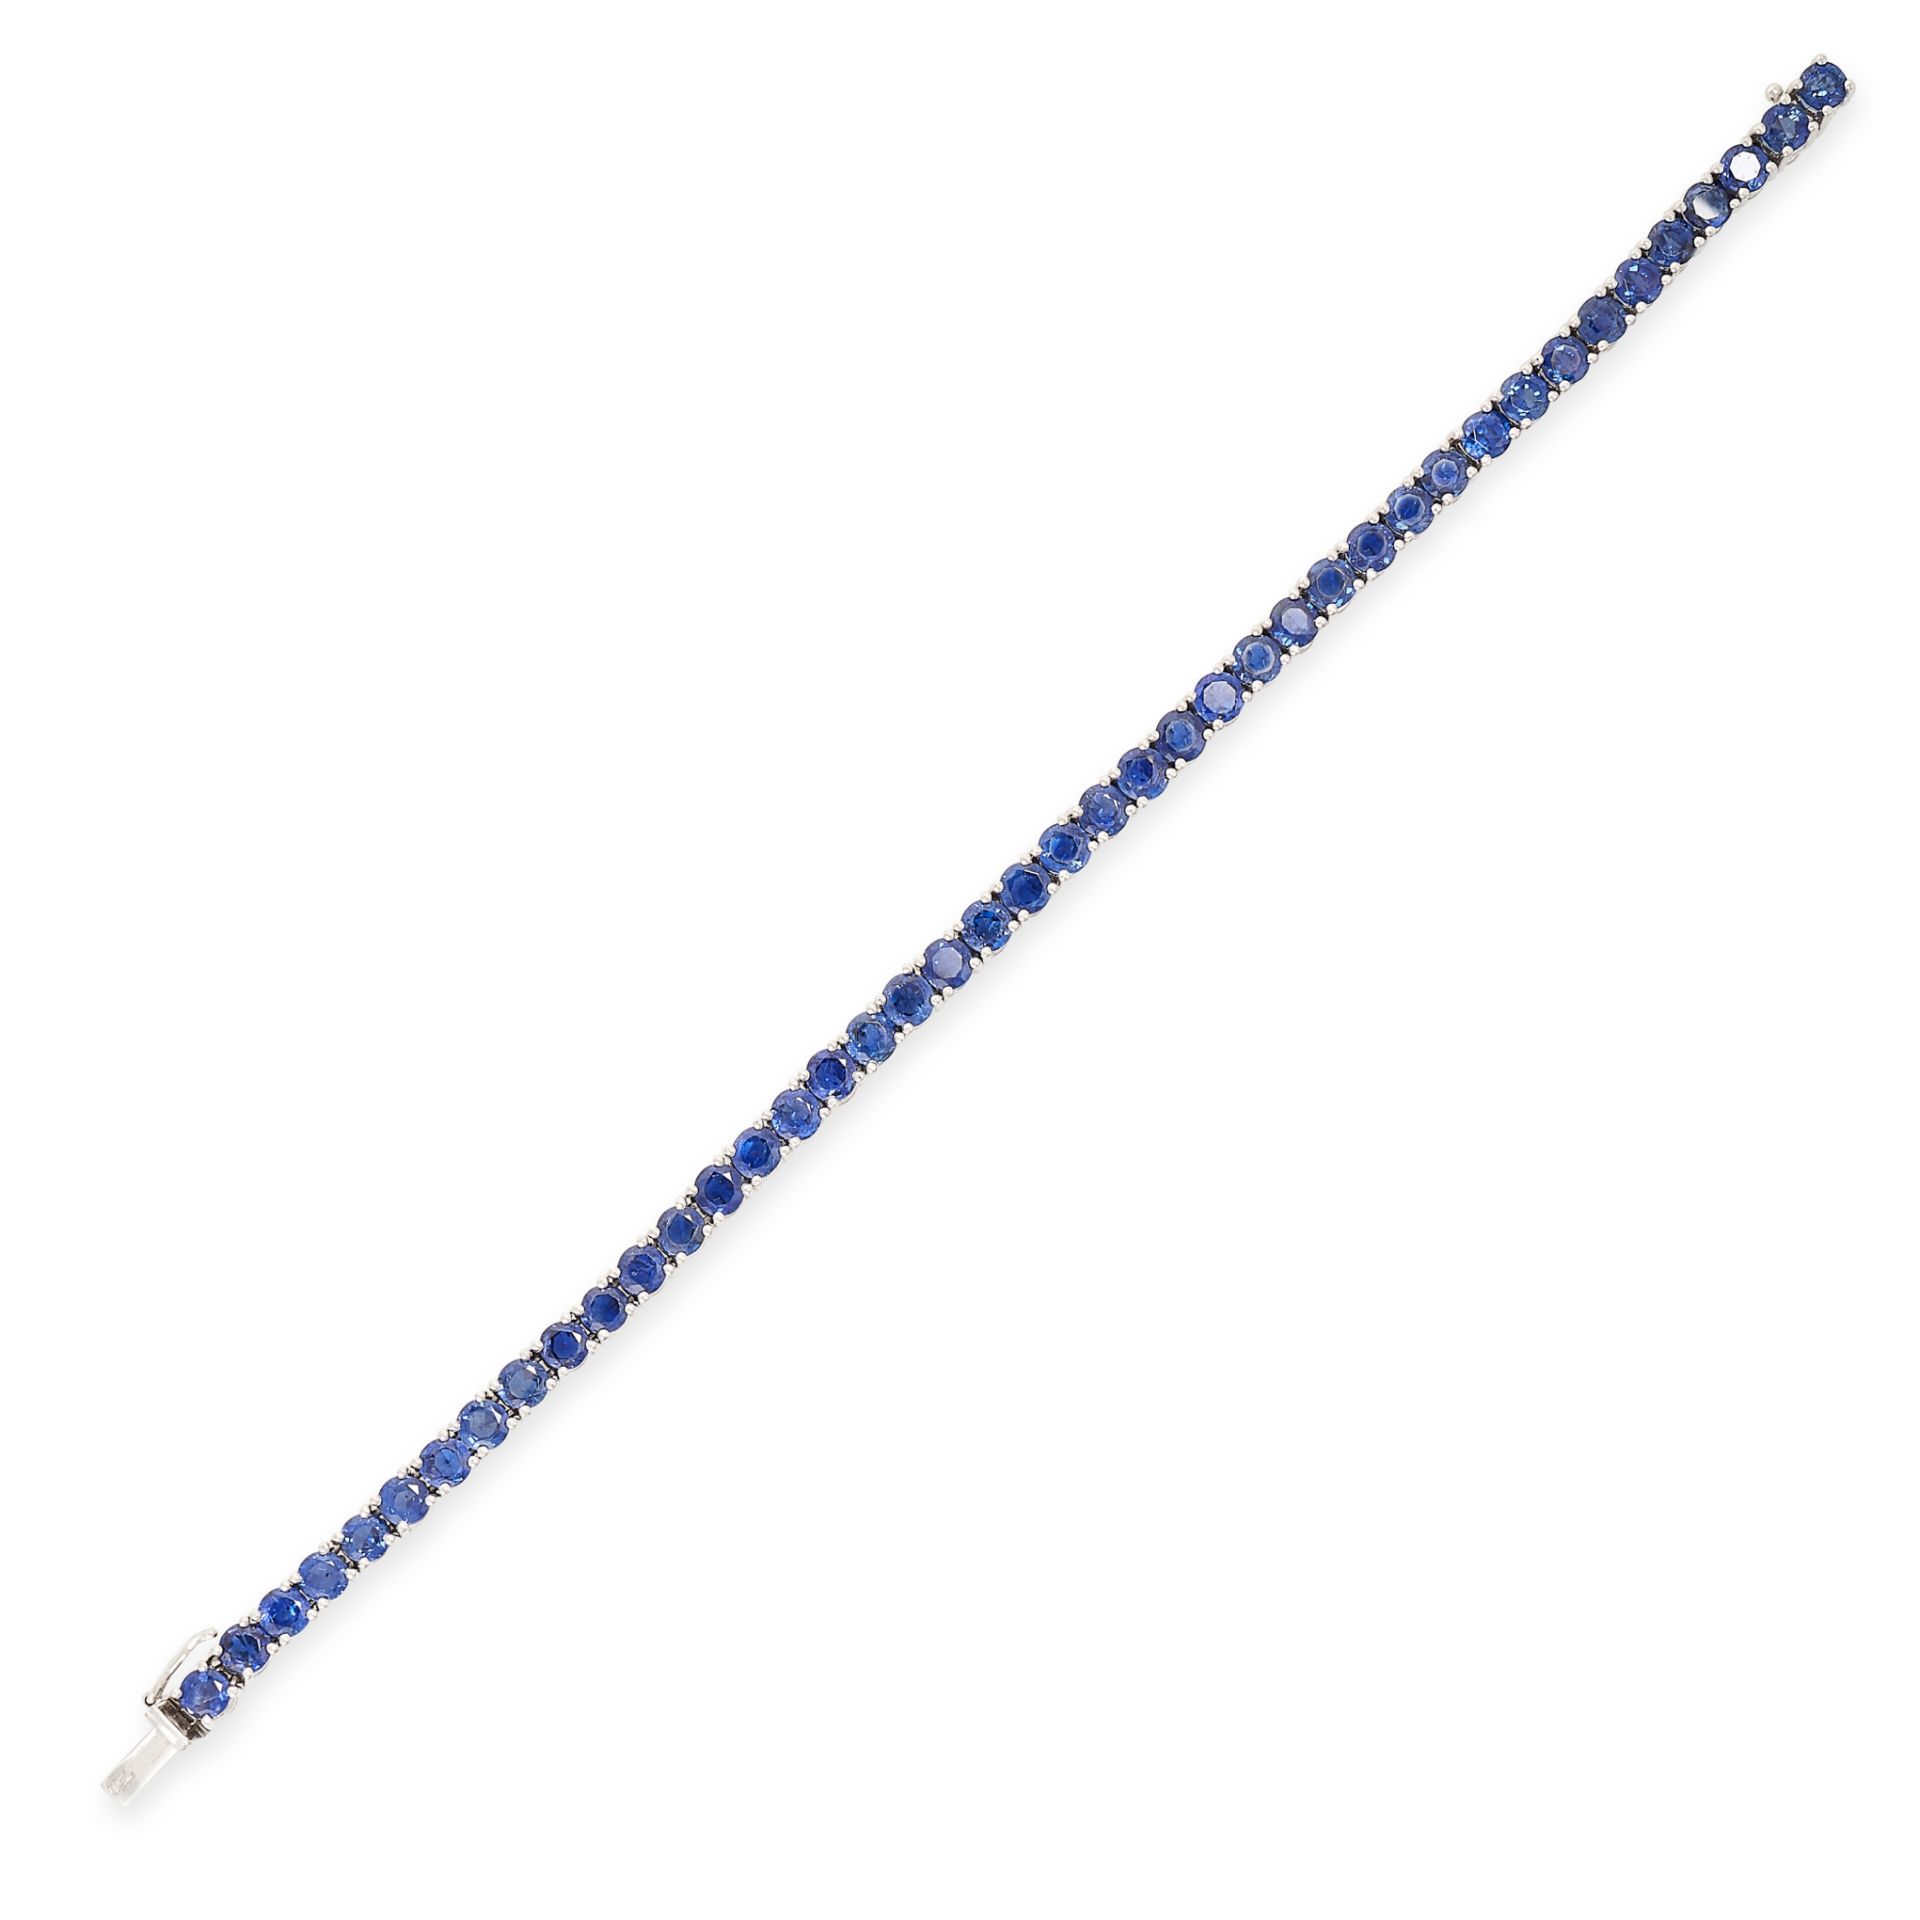 A BLUE SAPPHIRE LINE BRACELET in 18ct white gold, set with a single row of round cut blue sapphires,